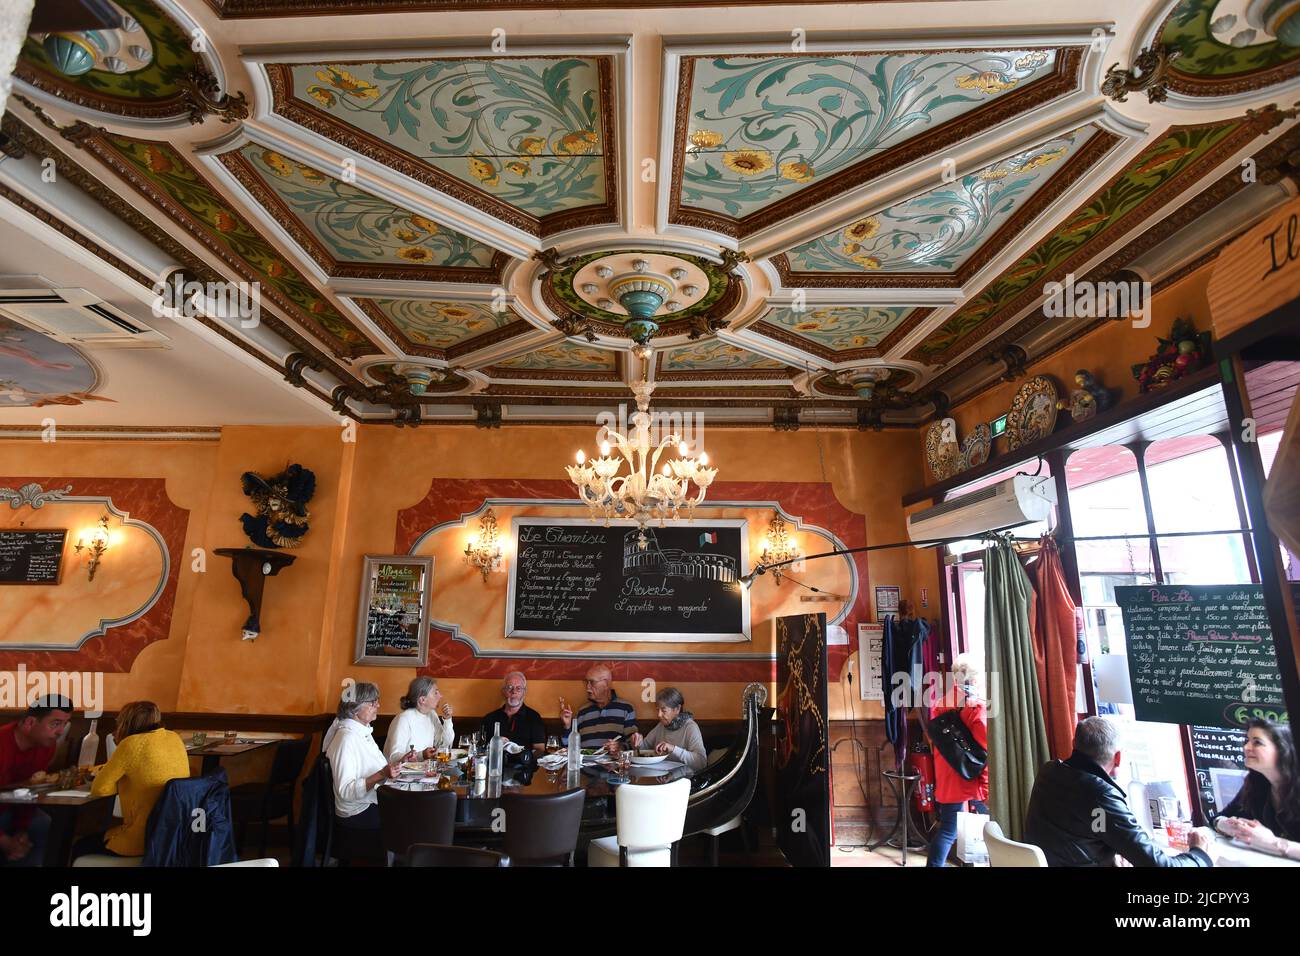 Italian Restaurant with magnificent Art Deco glazed tile ceiling in Bourges, France Stock Photo